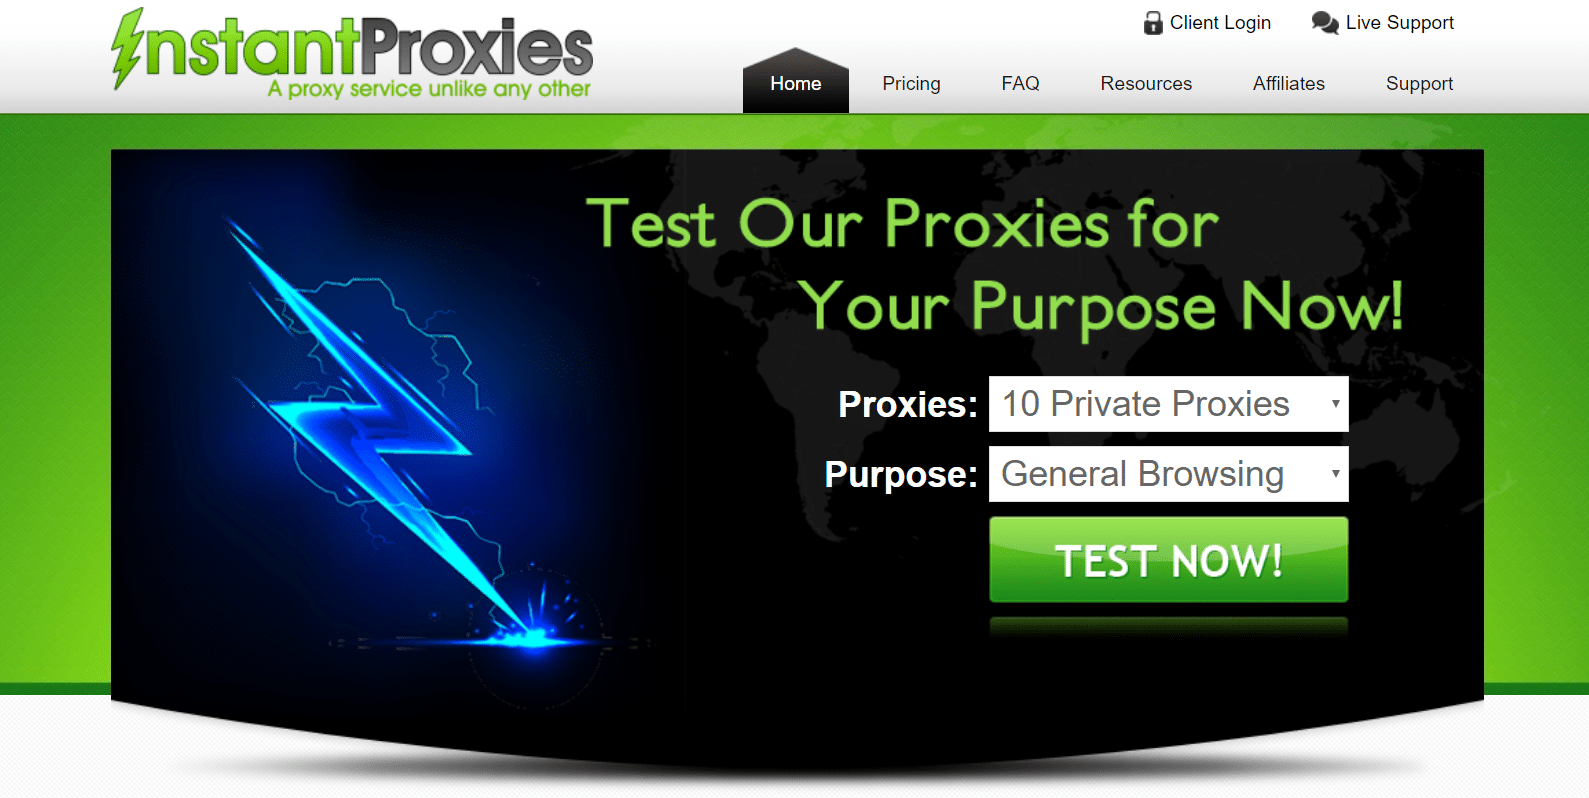 Buy Proxy Servers, Fast & Affordable